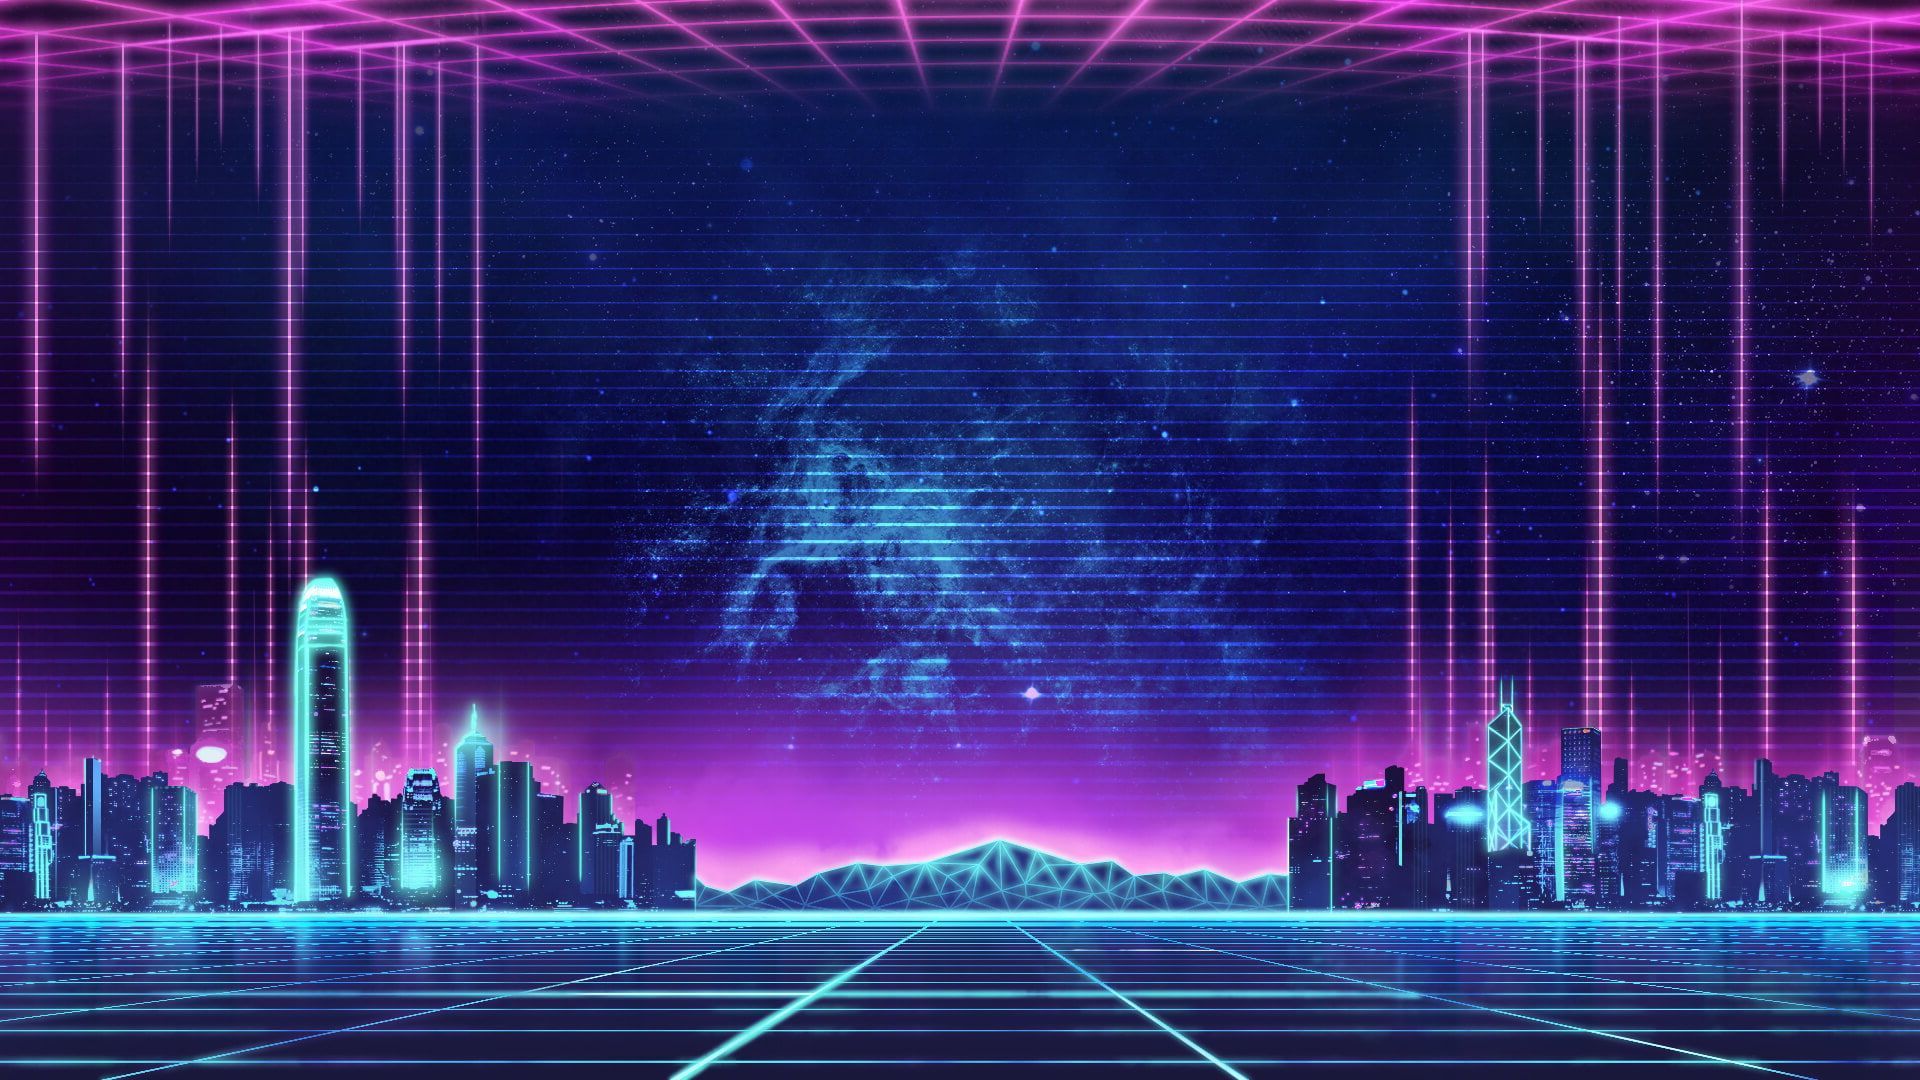 Wallpaper synthwave, music, retro, neon city, Others, architecture, built structure. City wallpaper, Neon wallpaper, Vaporwave wallpaper